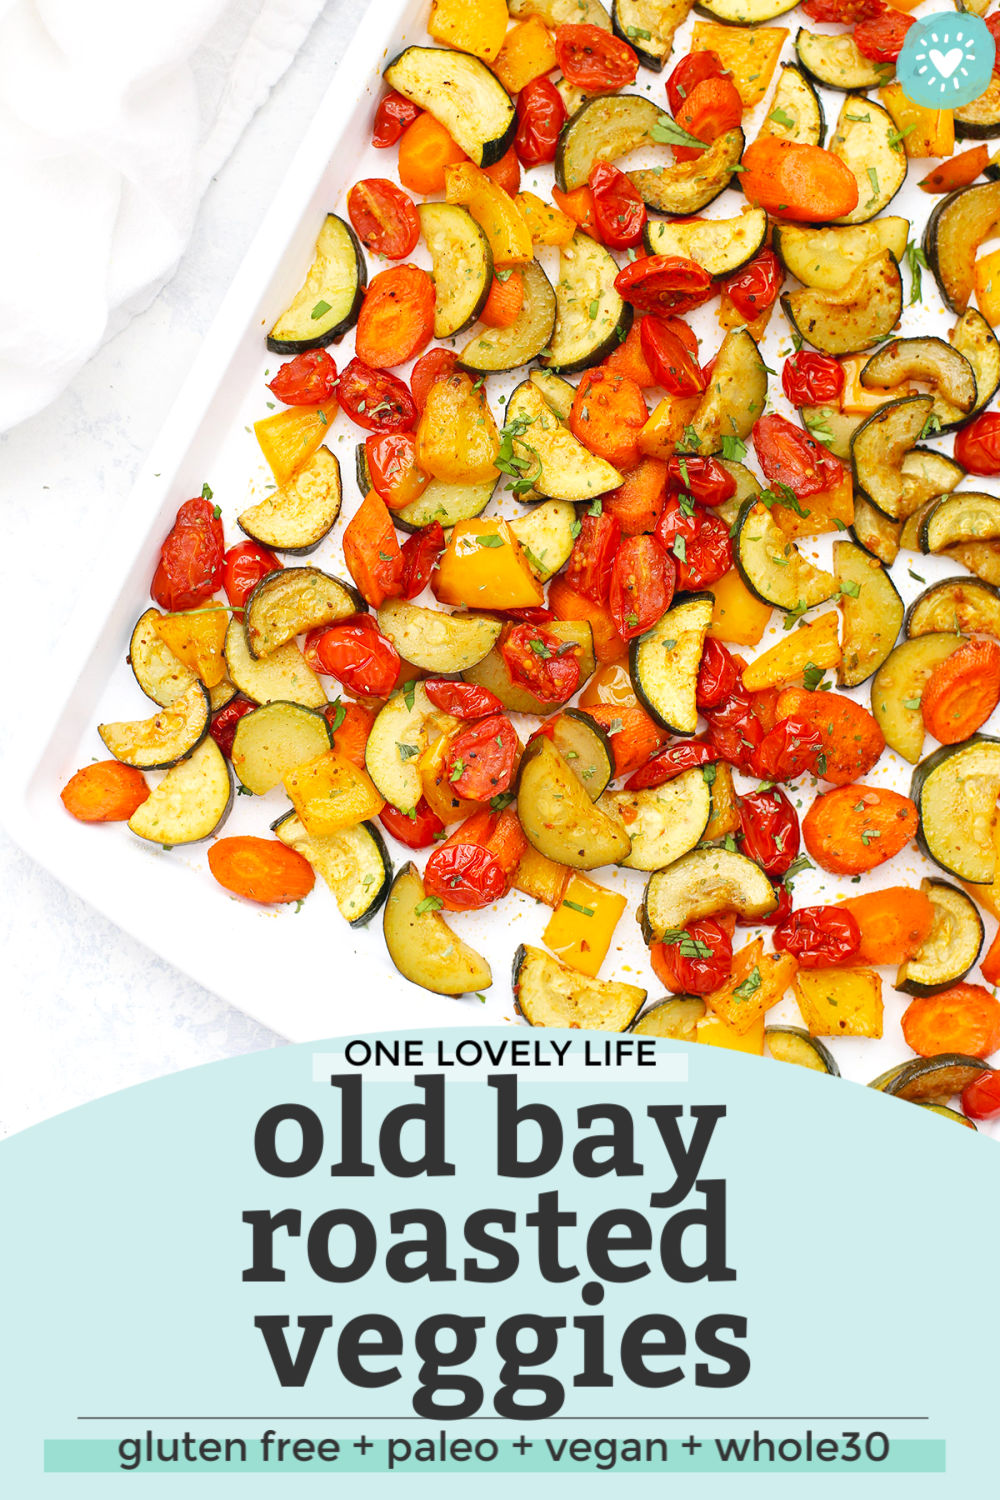 Old Bay Roasted Veggies from One Lovely Life